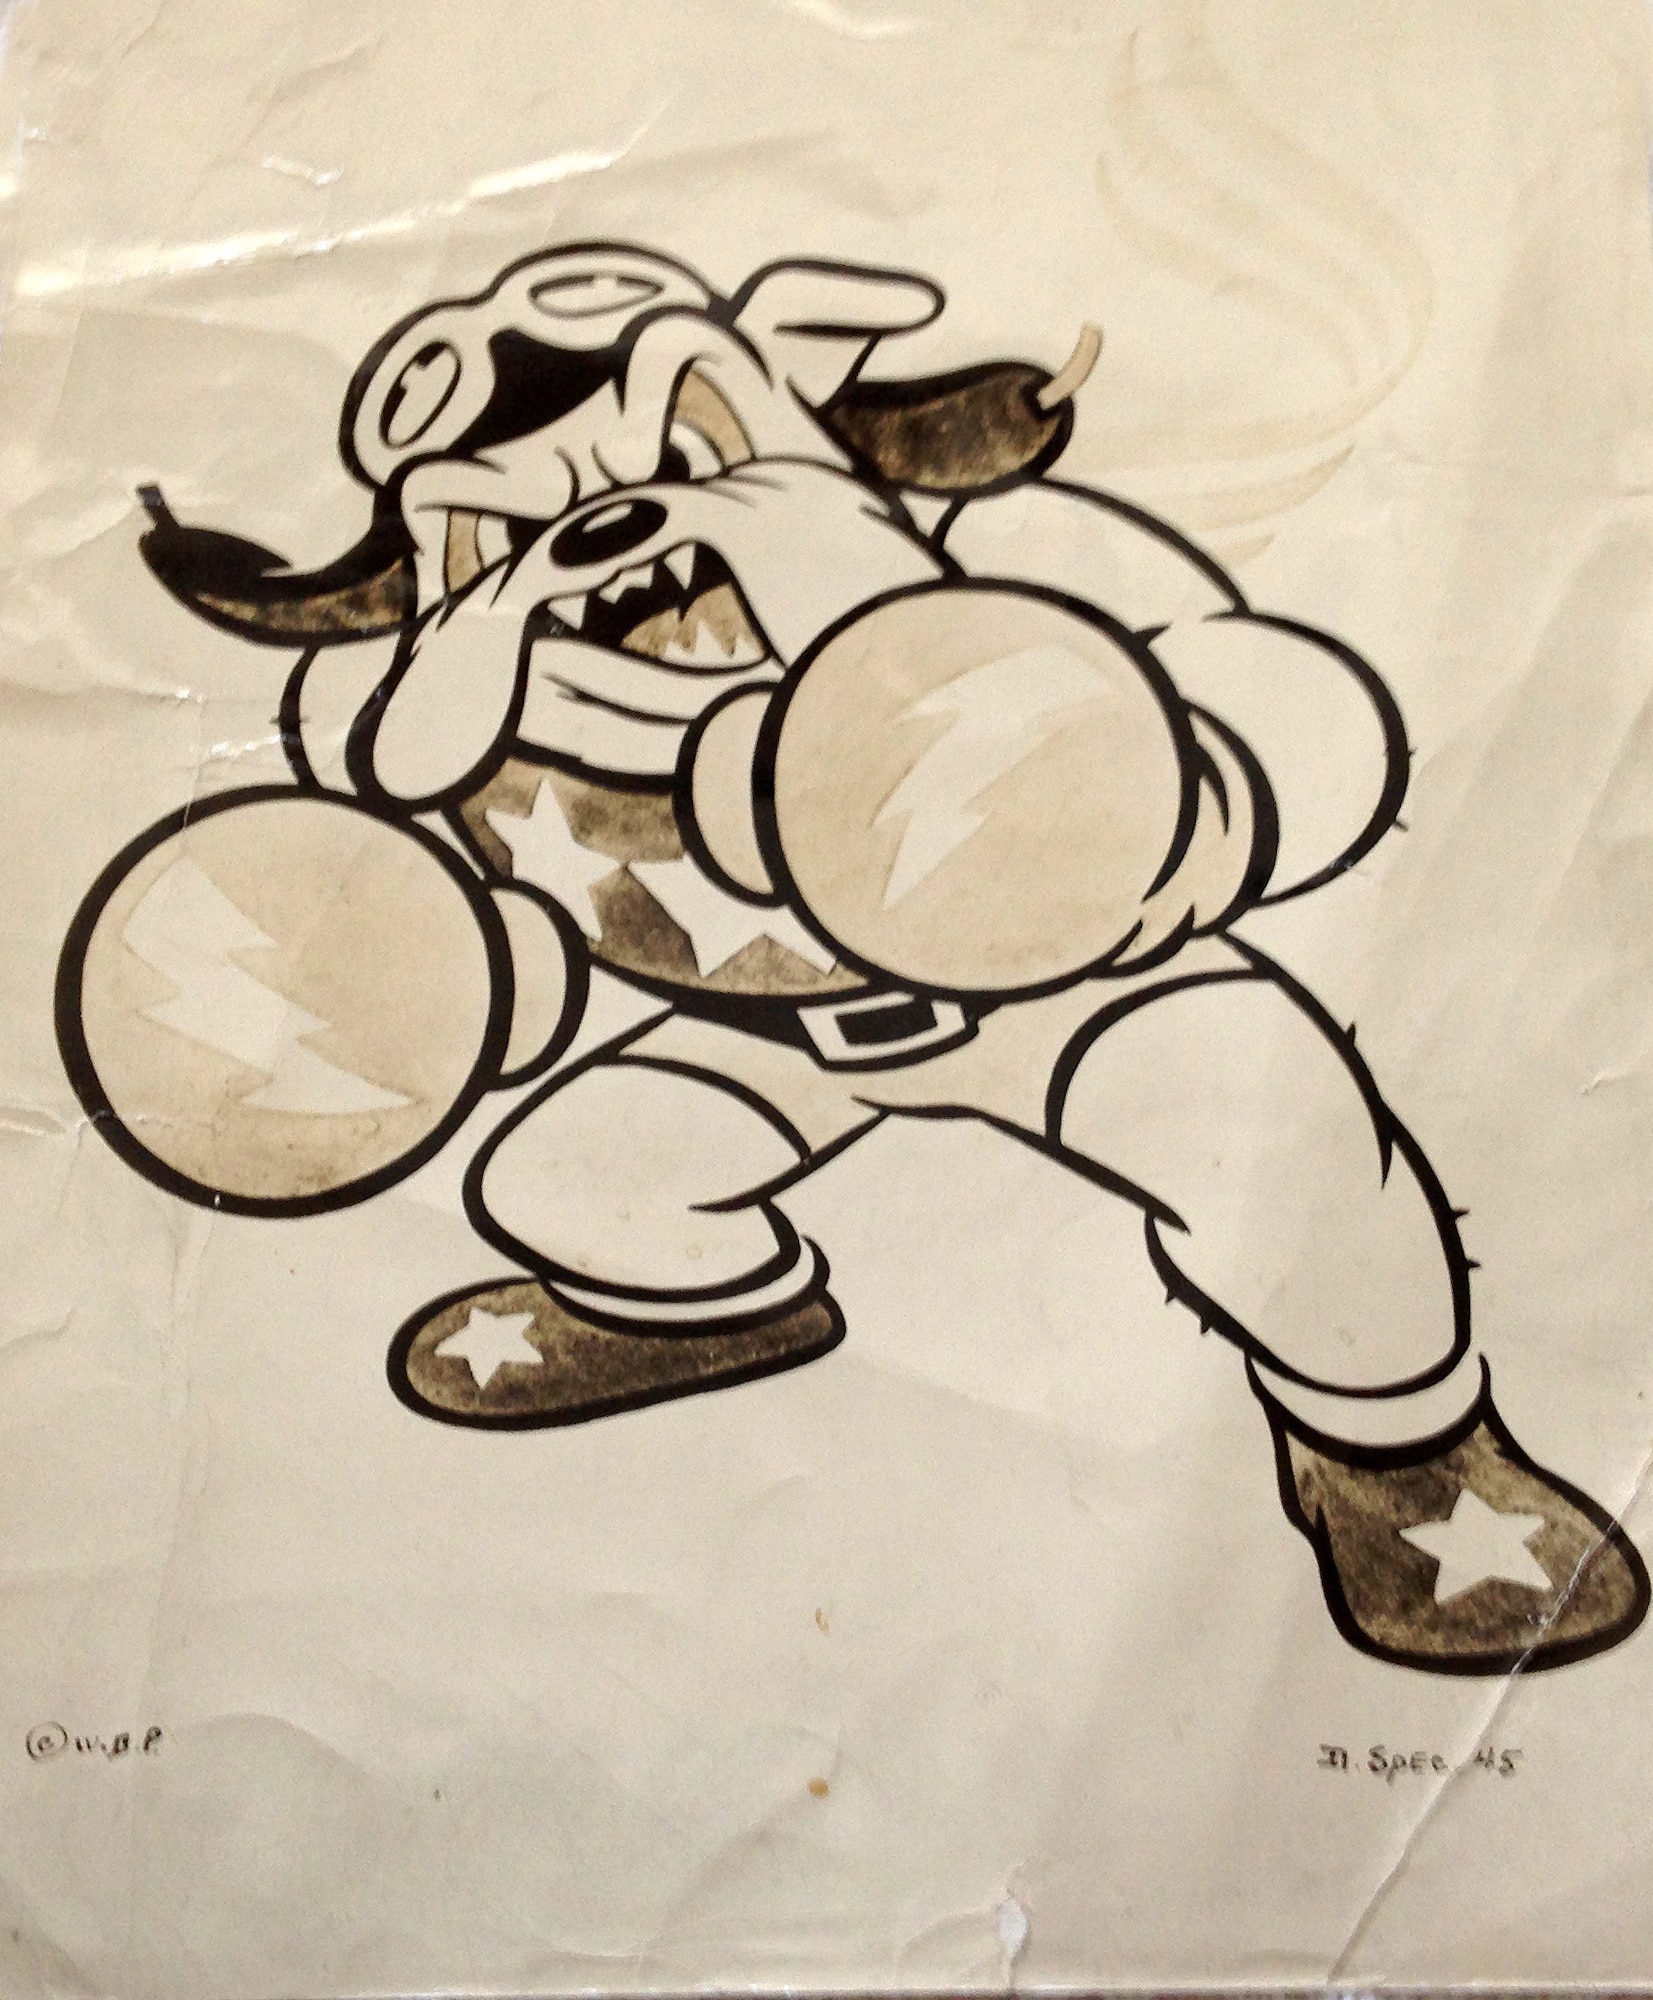 Disney himself took on a personal project for the war effort which was creating unique insignia to not only bring humor to units, but to help boost morale at home and overseas.  More and more of Disney’s art was used as decals on tanks, trucks, bombs, planes and many different types of military transport and equipment. The boxing bulldog was presented to Sgt. Seymour Pine by Walt Disney, himself, while serving in the 62nd Fighter Squadron as a Stars and Stripes reporter. (Courtesy photo from Richard Pine)